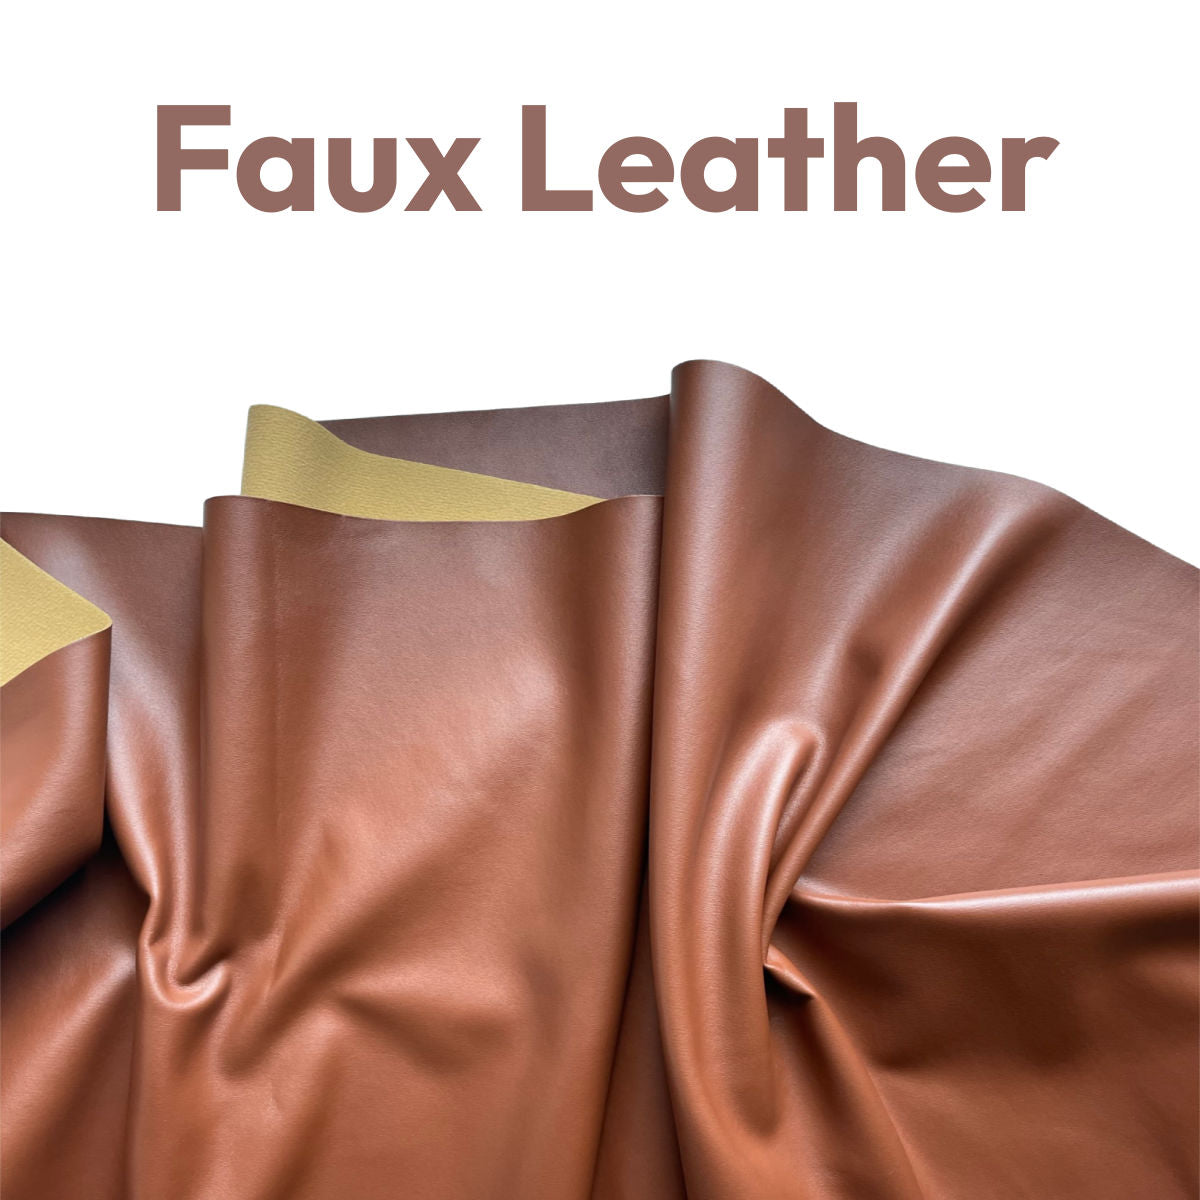 Faux Leather (old)